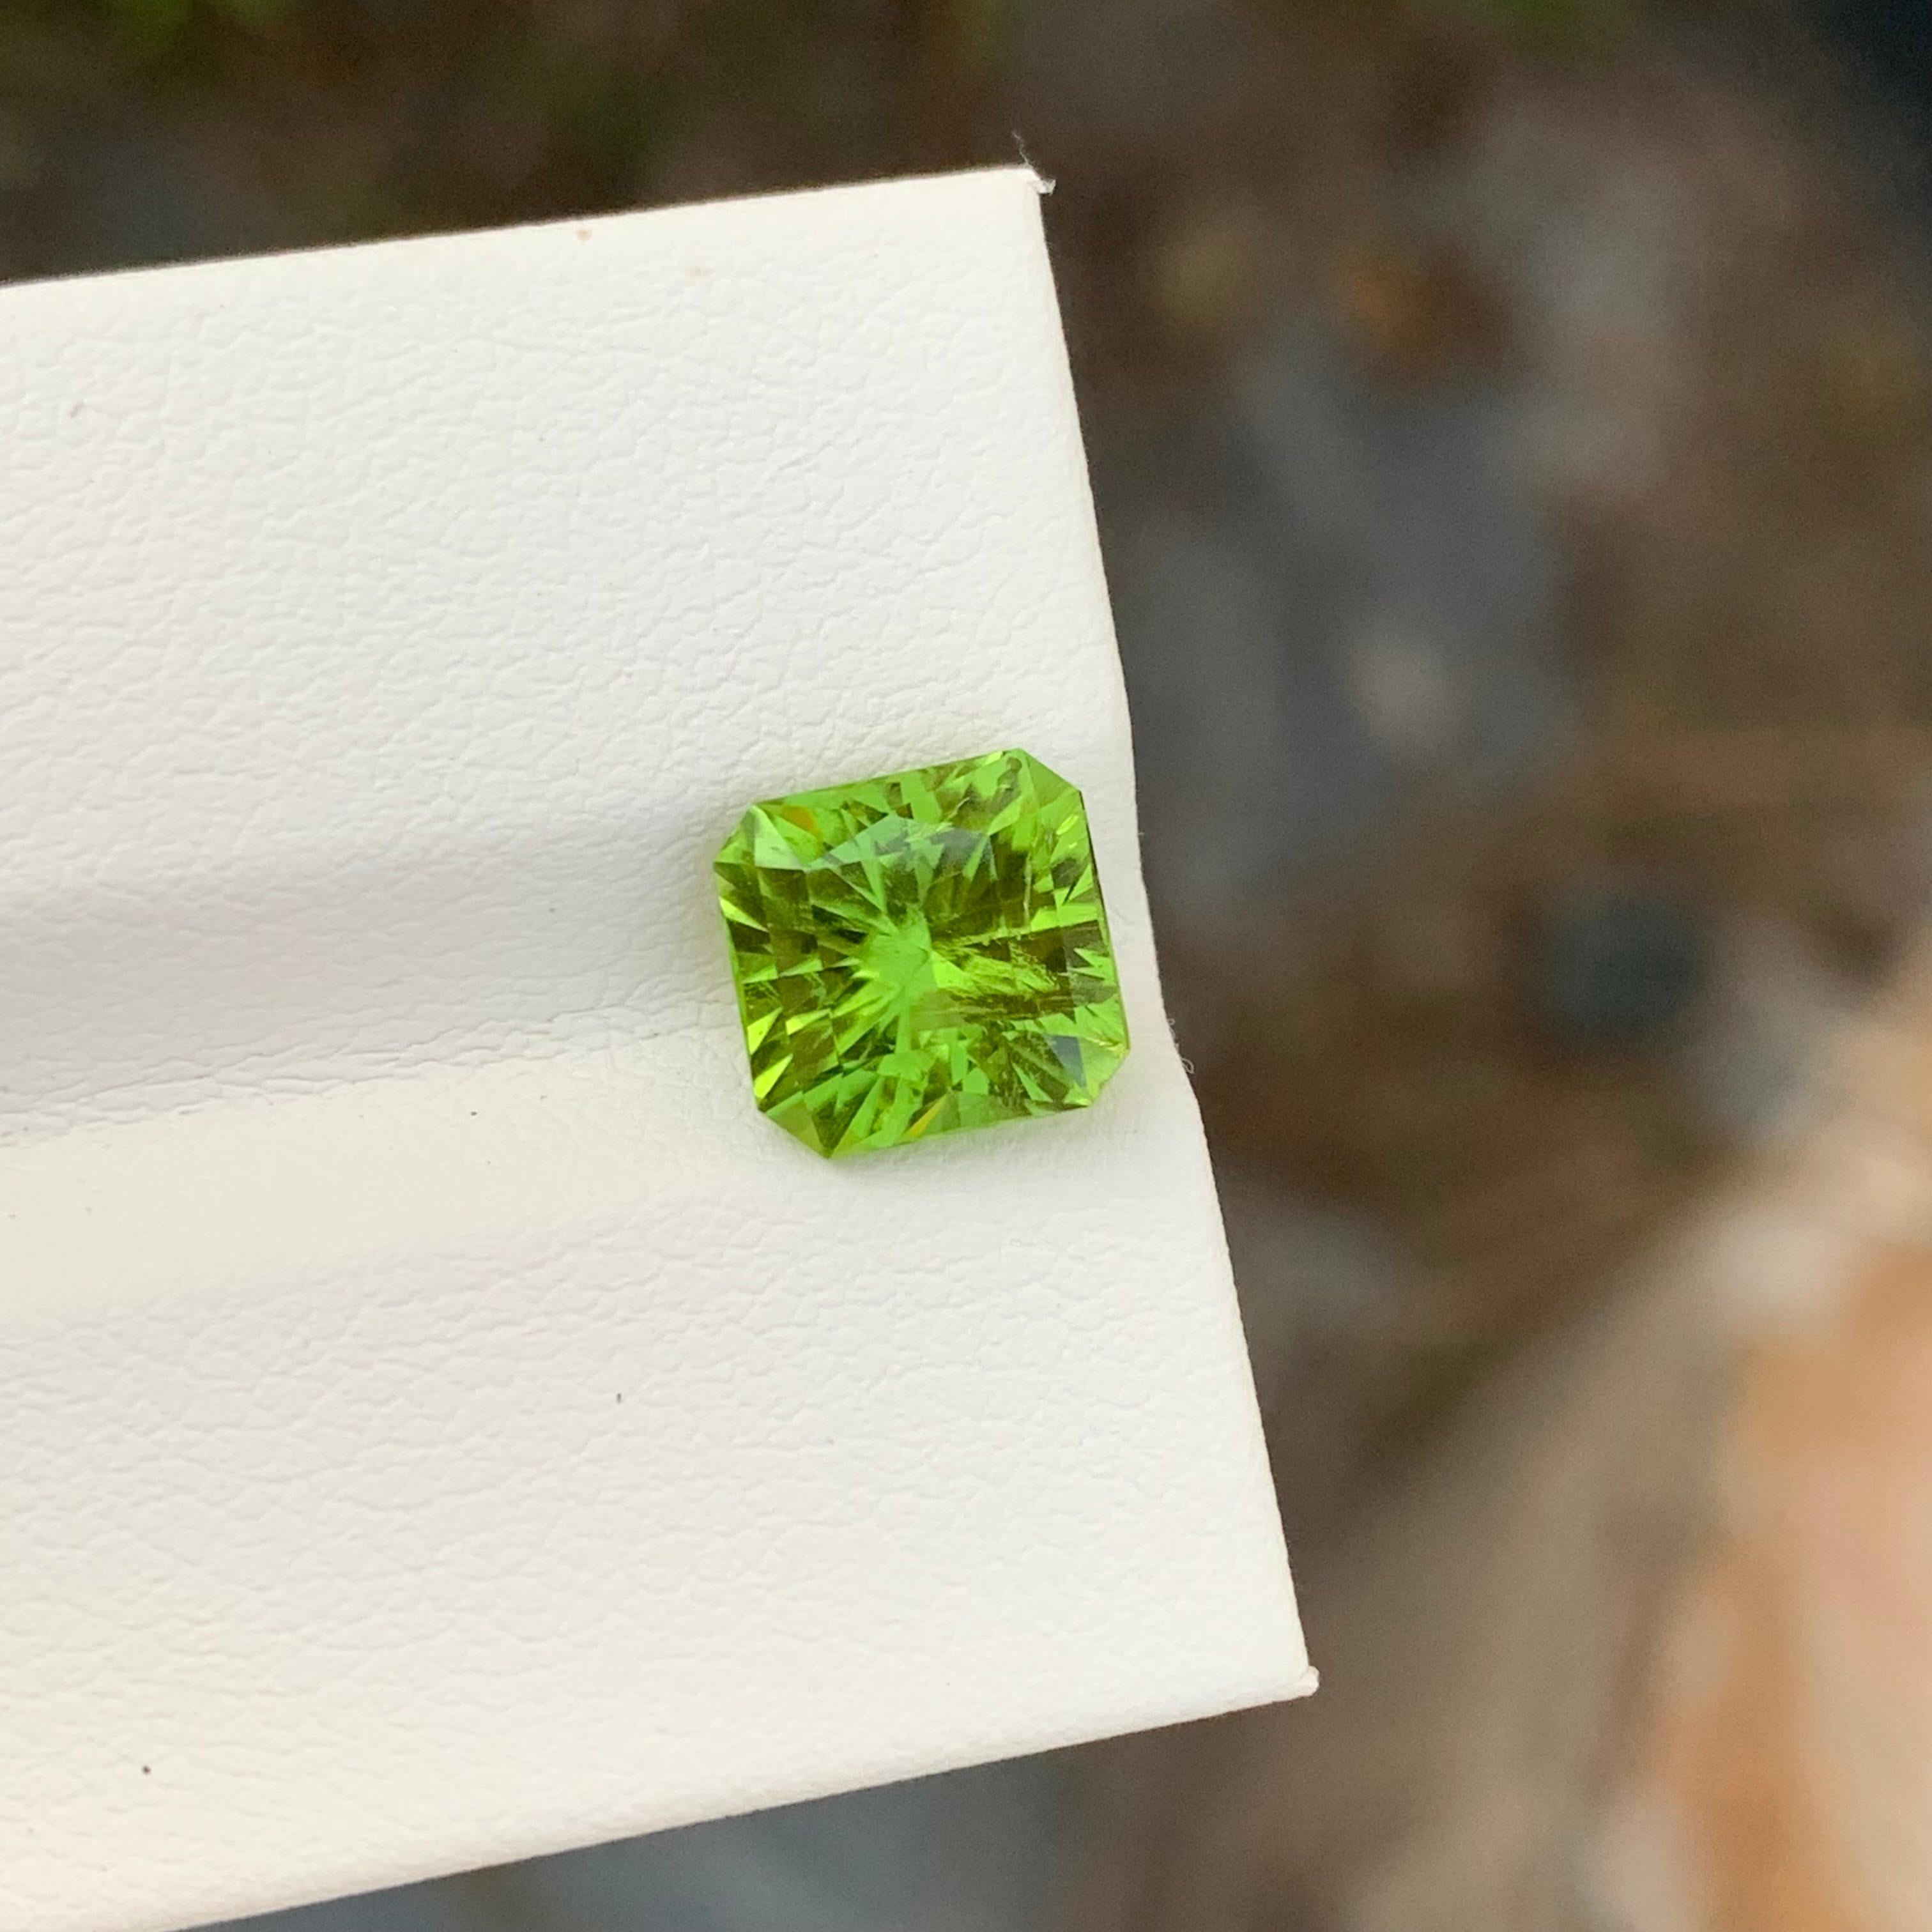 Loose Peridot
Weight: 3.00 Carats
Dimension: 8 x 7.8 x 6 Mm
Colour: Green
Origin: Supat Valley, Pakistan
Shape: Square 
Certificate: On Demand
Treatment: Non

Peridot, a vibrant and lustrous gemstone, has been cherished for centuries for its unique